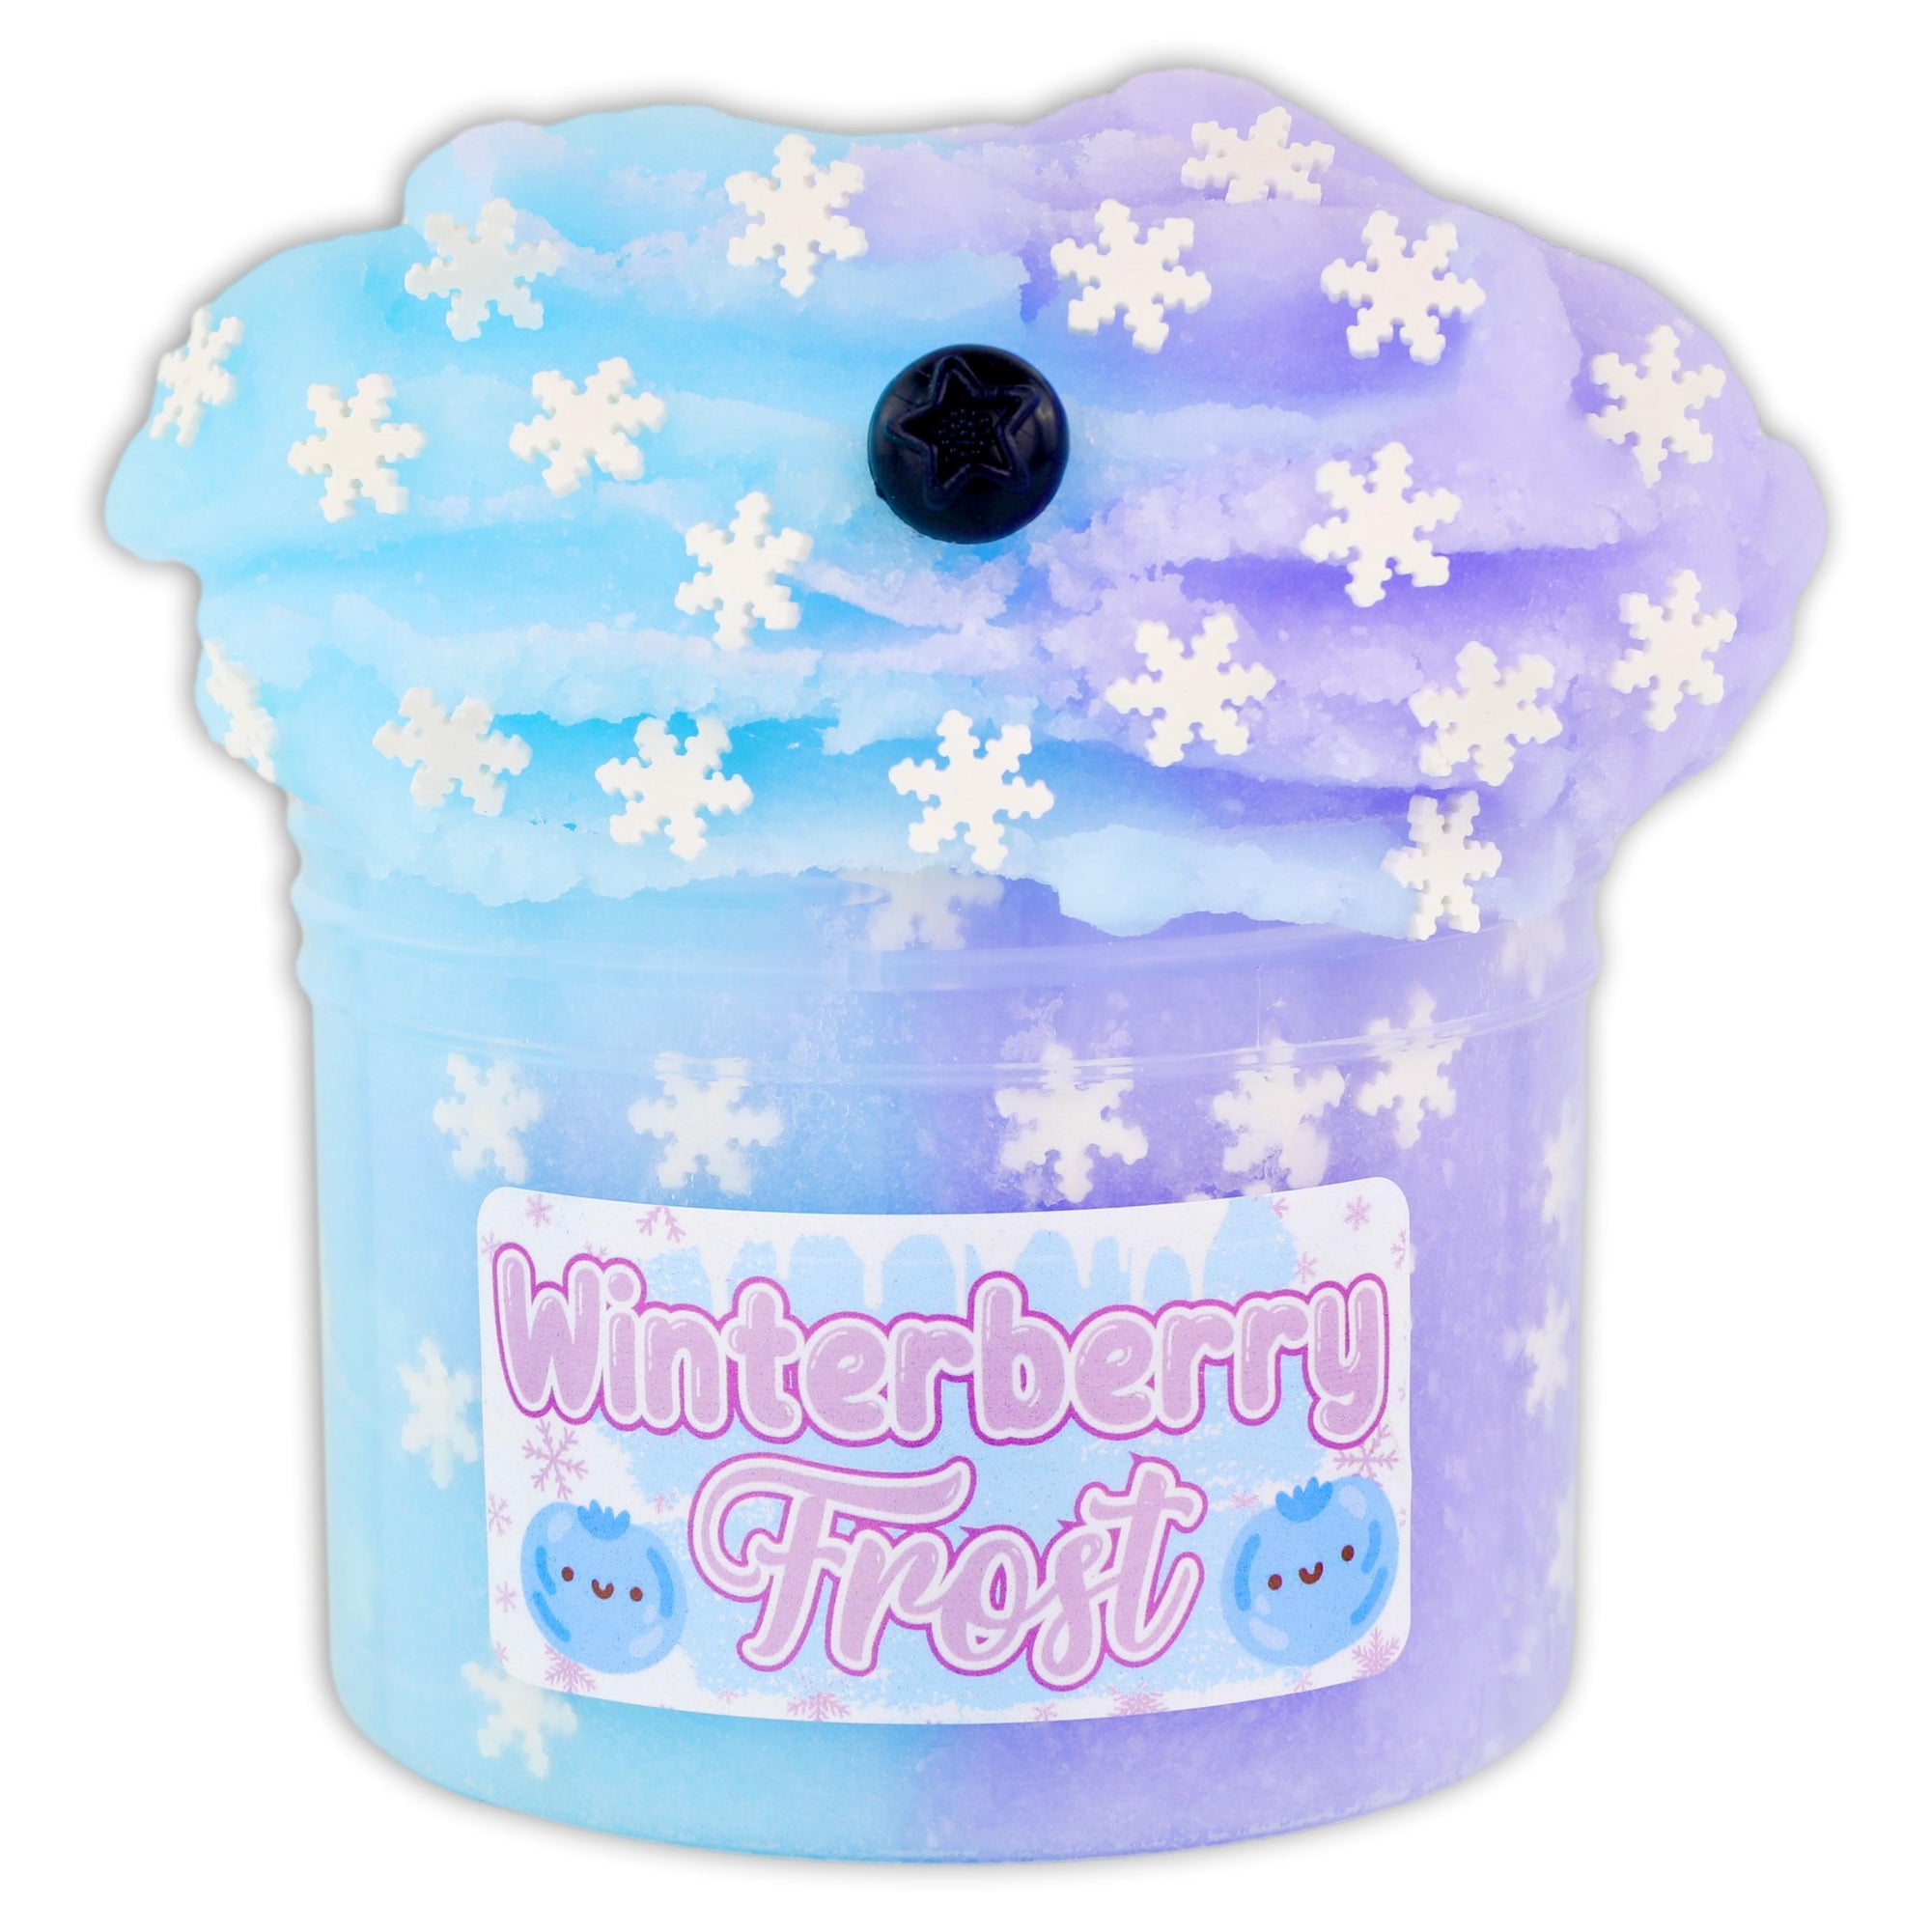 Experience a winter wonderland with Winterberry Frost! This gorgeous icee slime combines pastel blue and purple colors, snowflake fimos, and a charming blueberry on top. The scent of frosted berries will transport you to a dreamy world. Get ready to play with this dreamy slime!